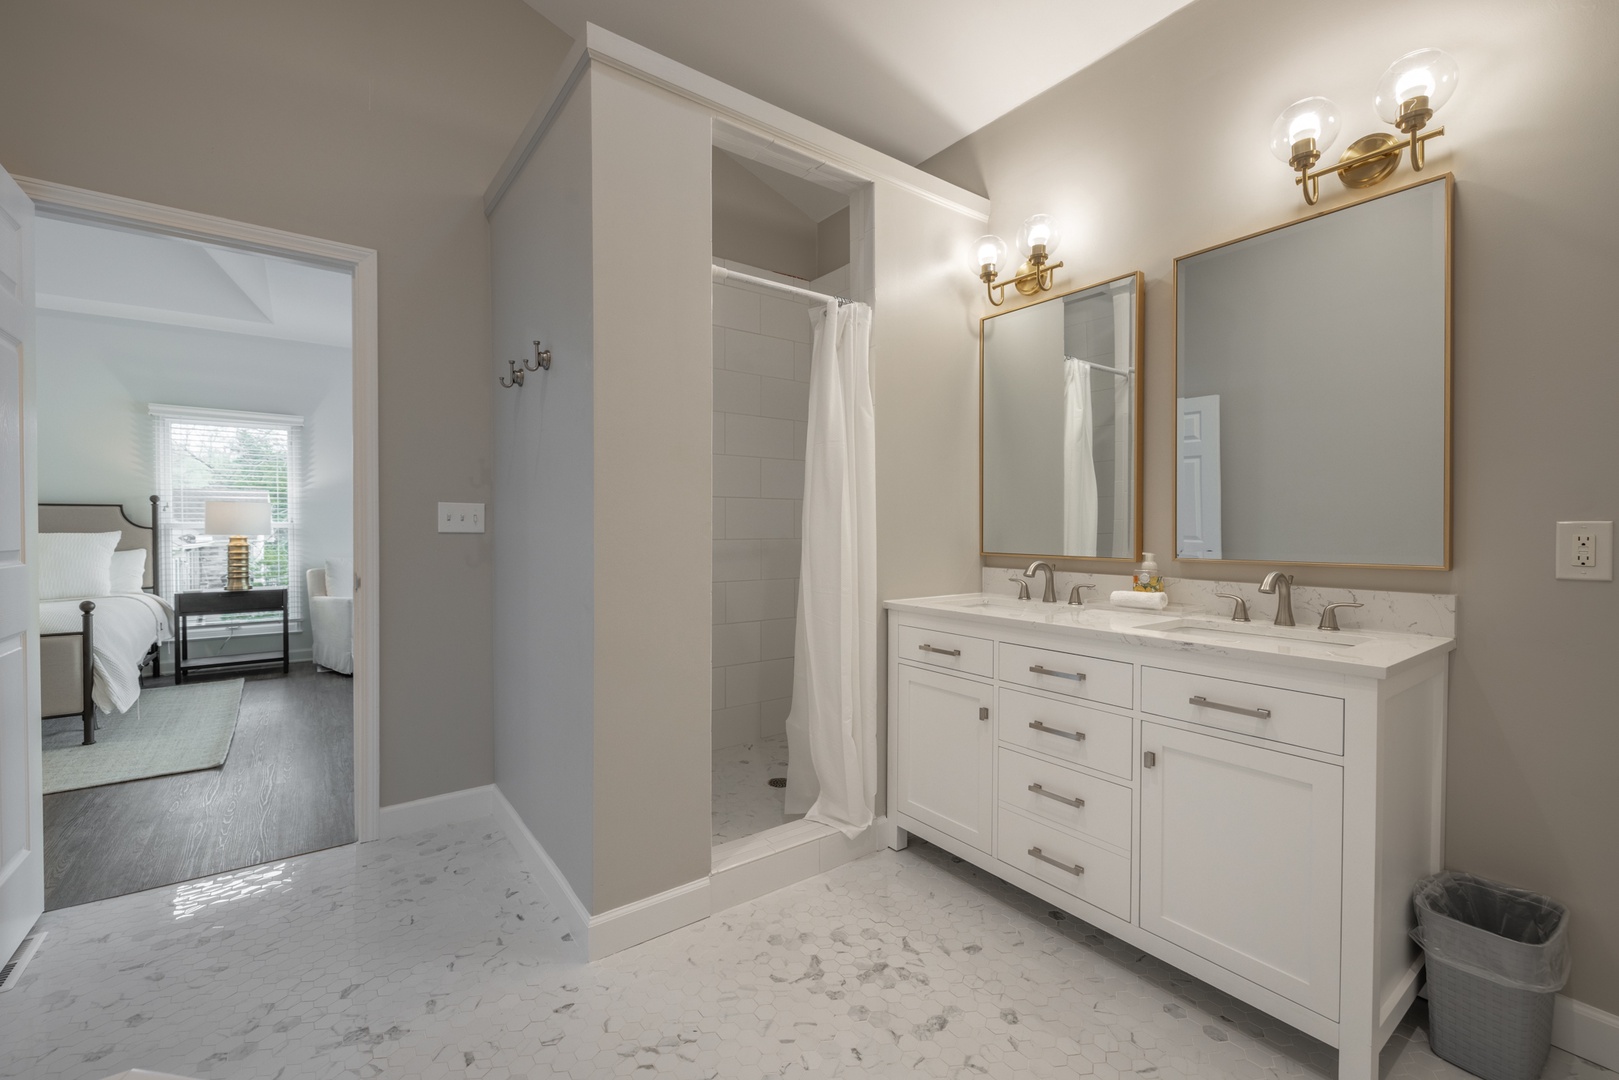 Pristine flooring, a stand alone shower, double vanities, and an oversized jetted tub scream luxury in the en suite primary bathroom